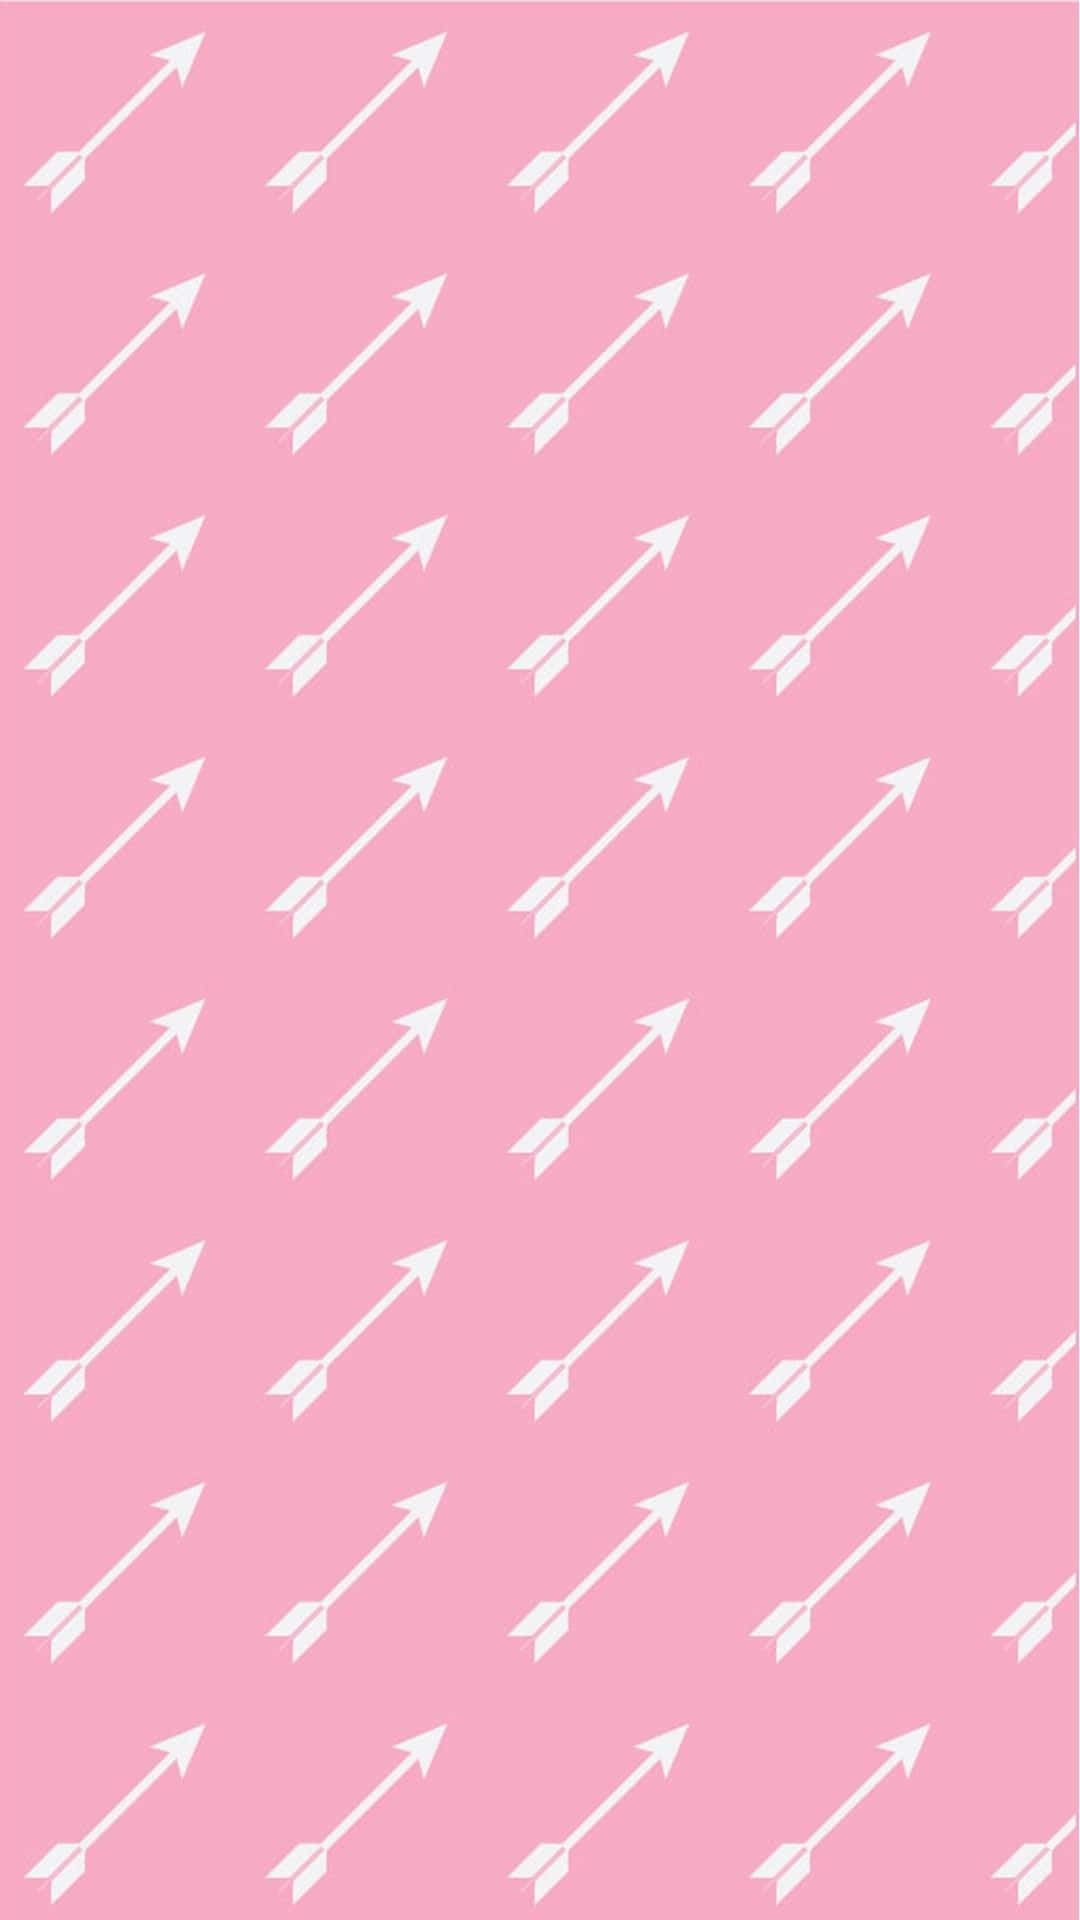 White Arrows Pattern In Pink Aesthetic iPhone Wallpaper